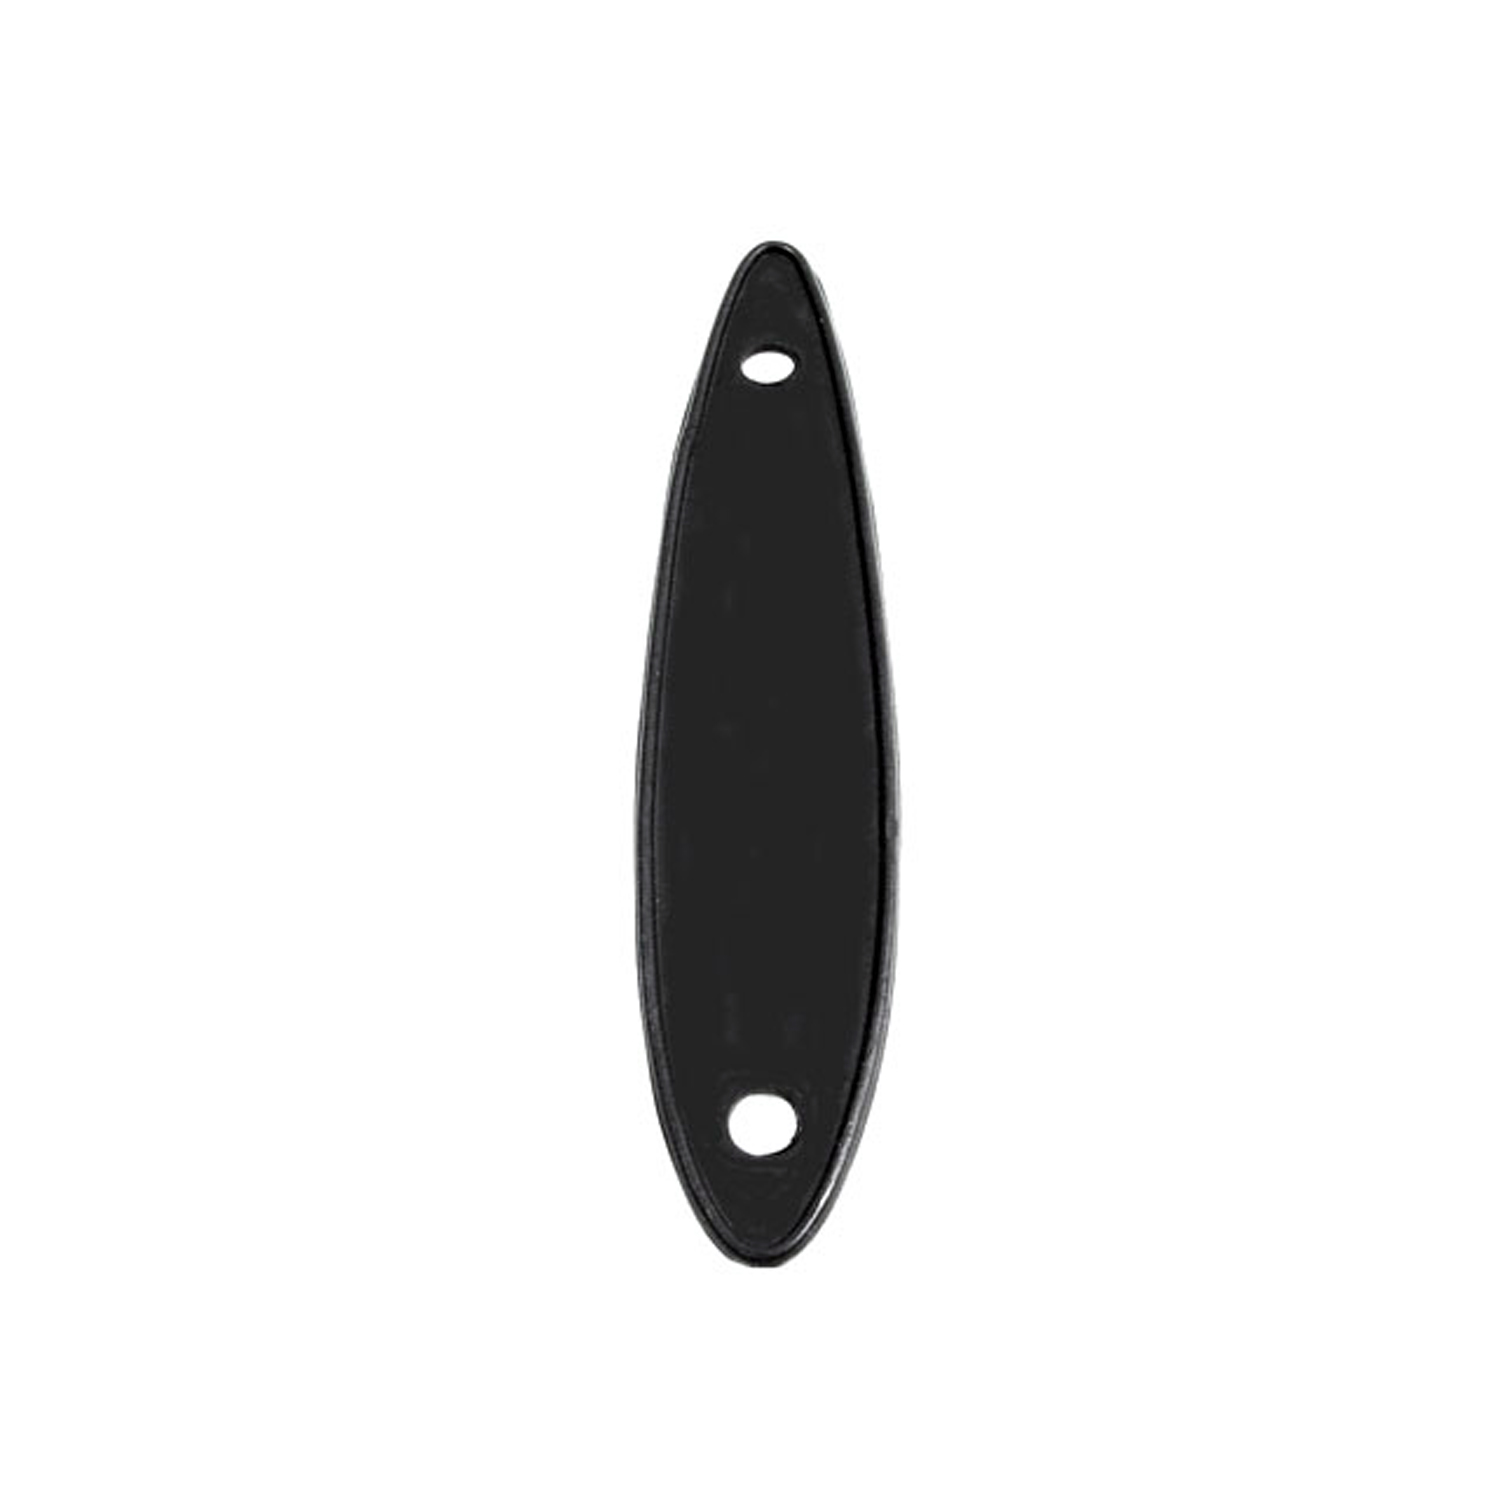 1955 Ford Country Sedan Mirror-on-door mounting pad. Fits models with  6-3/8 in-MP 996-R